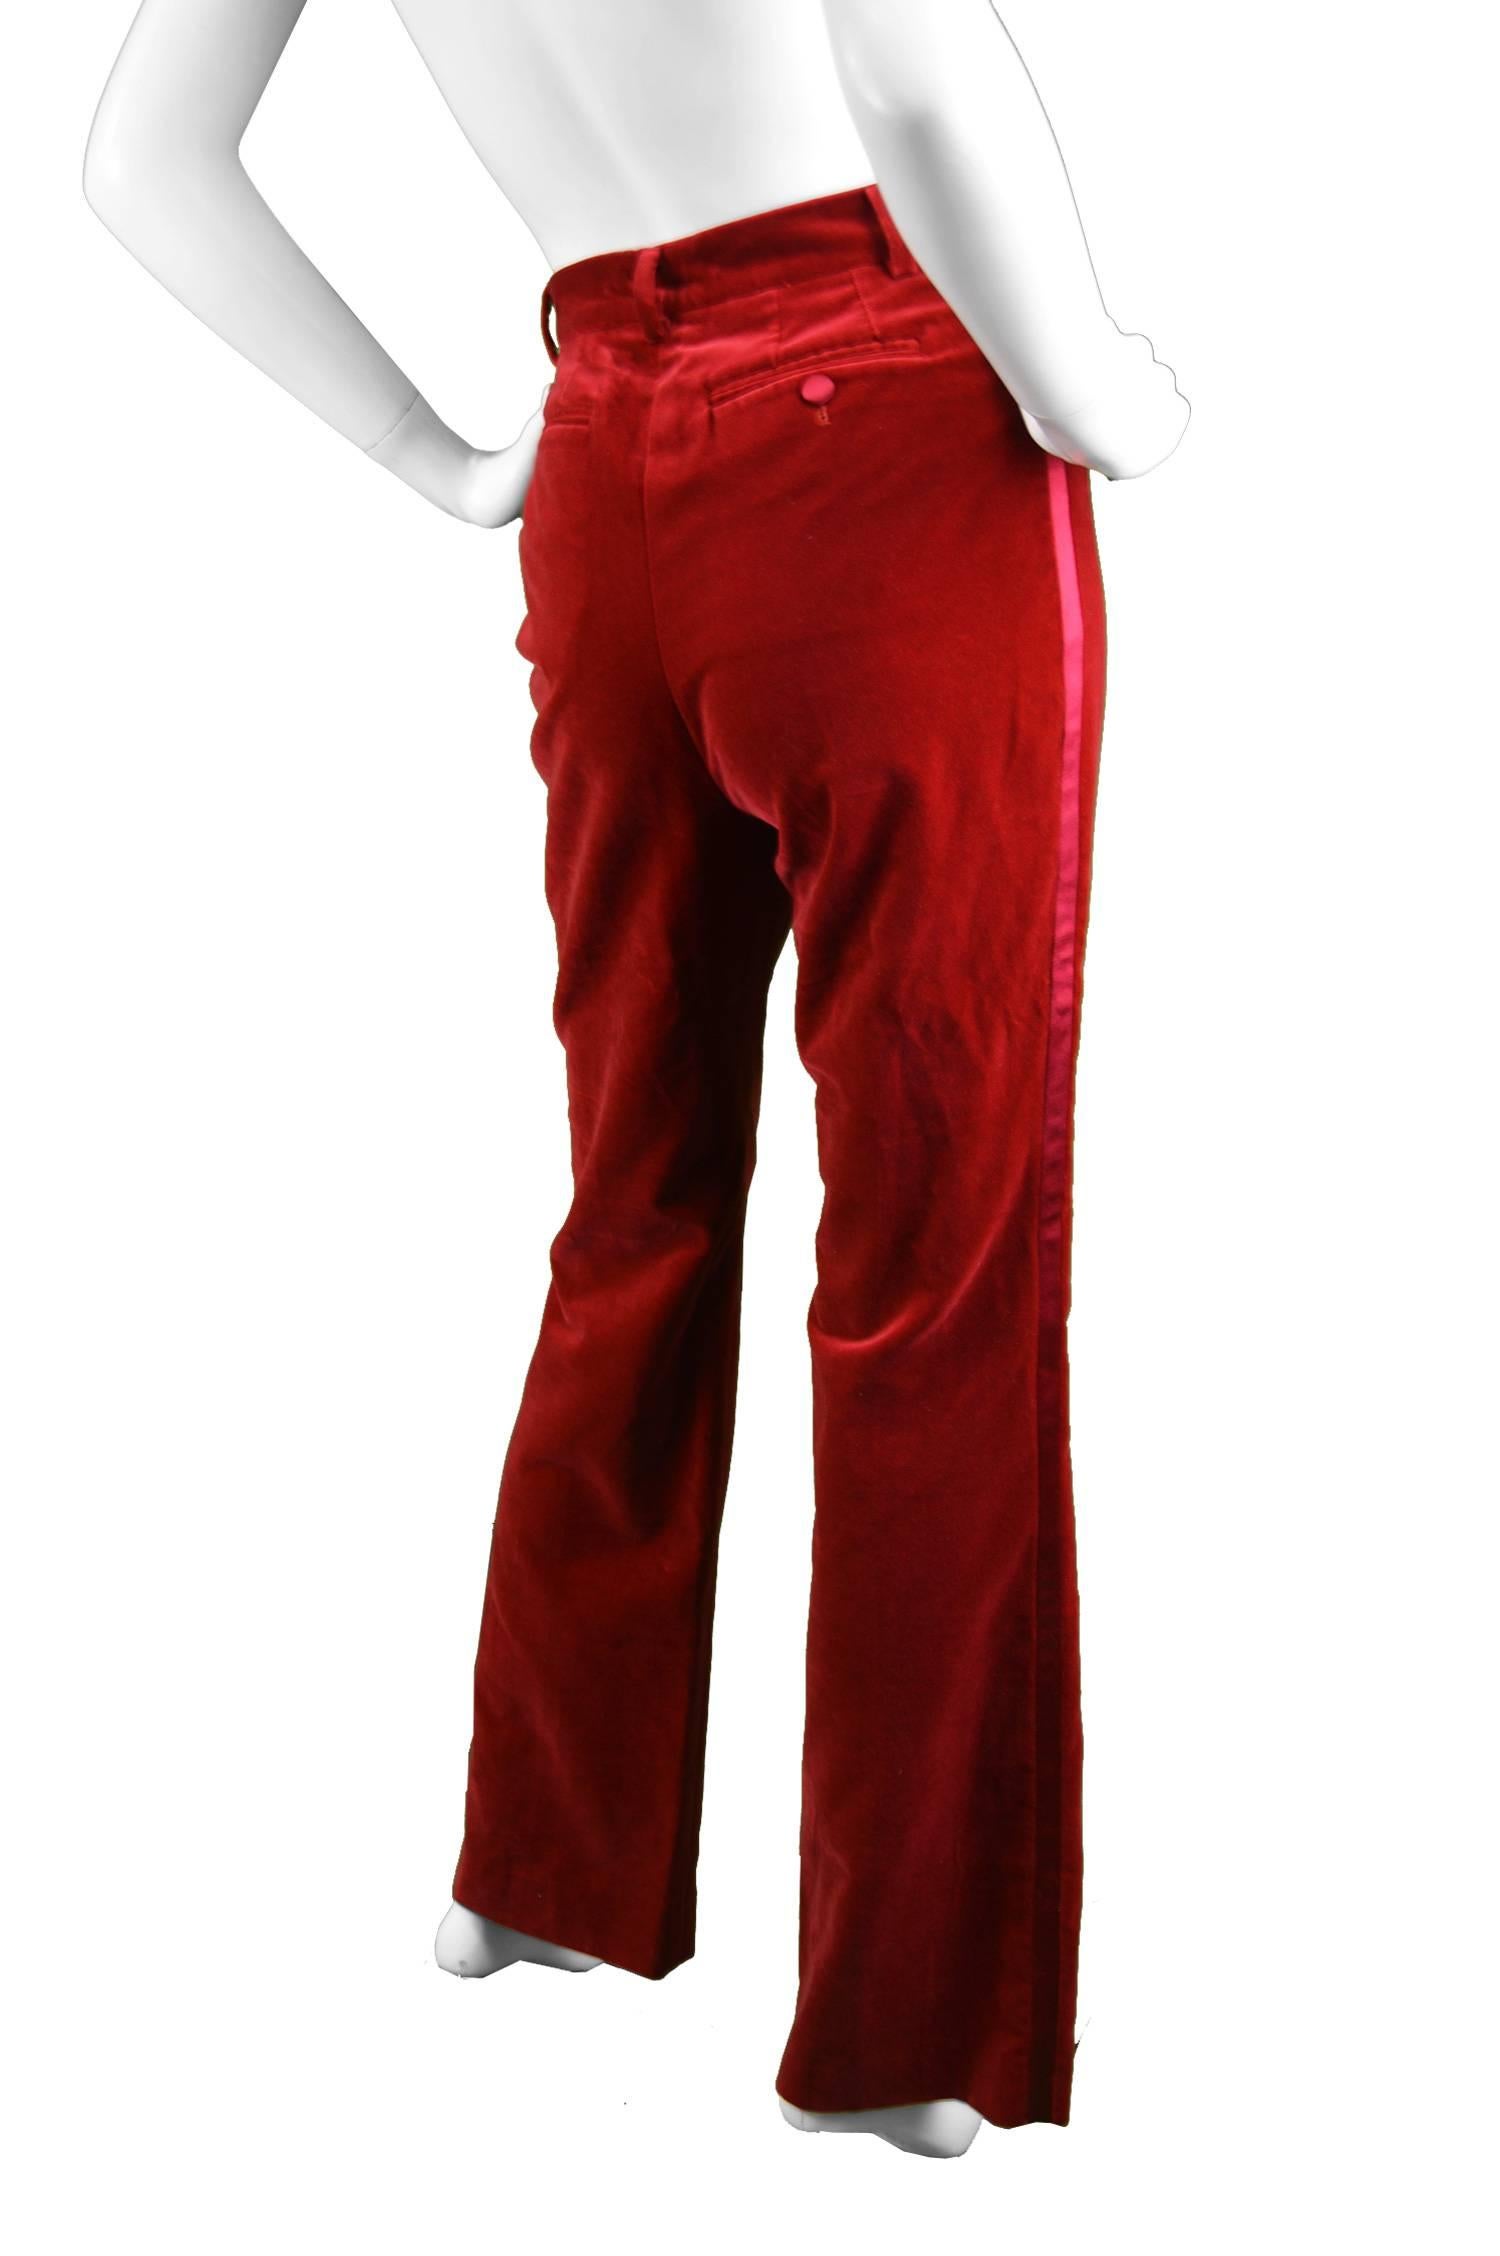 Tom Ford for Gucci Iconic Red Velvet Tuxedo Pants with Satin Trim, Fall 1996 In Excellent Condition In Doncaster, South Yorkshire